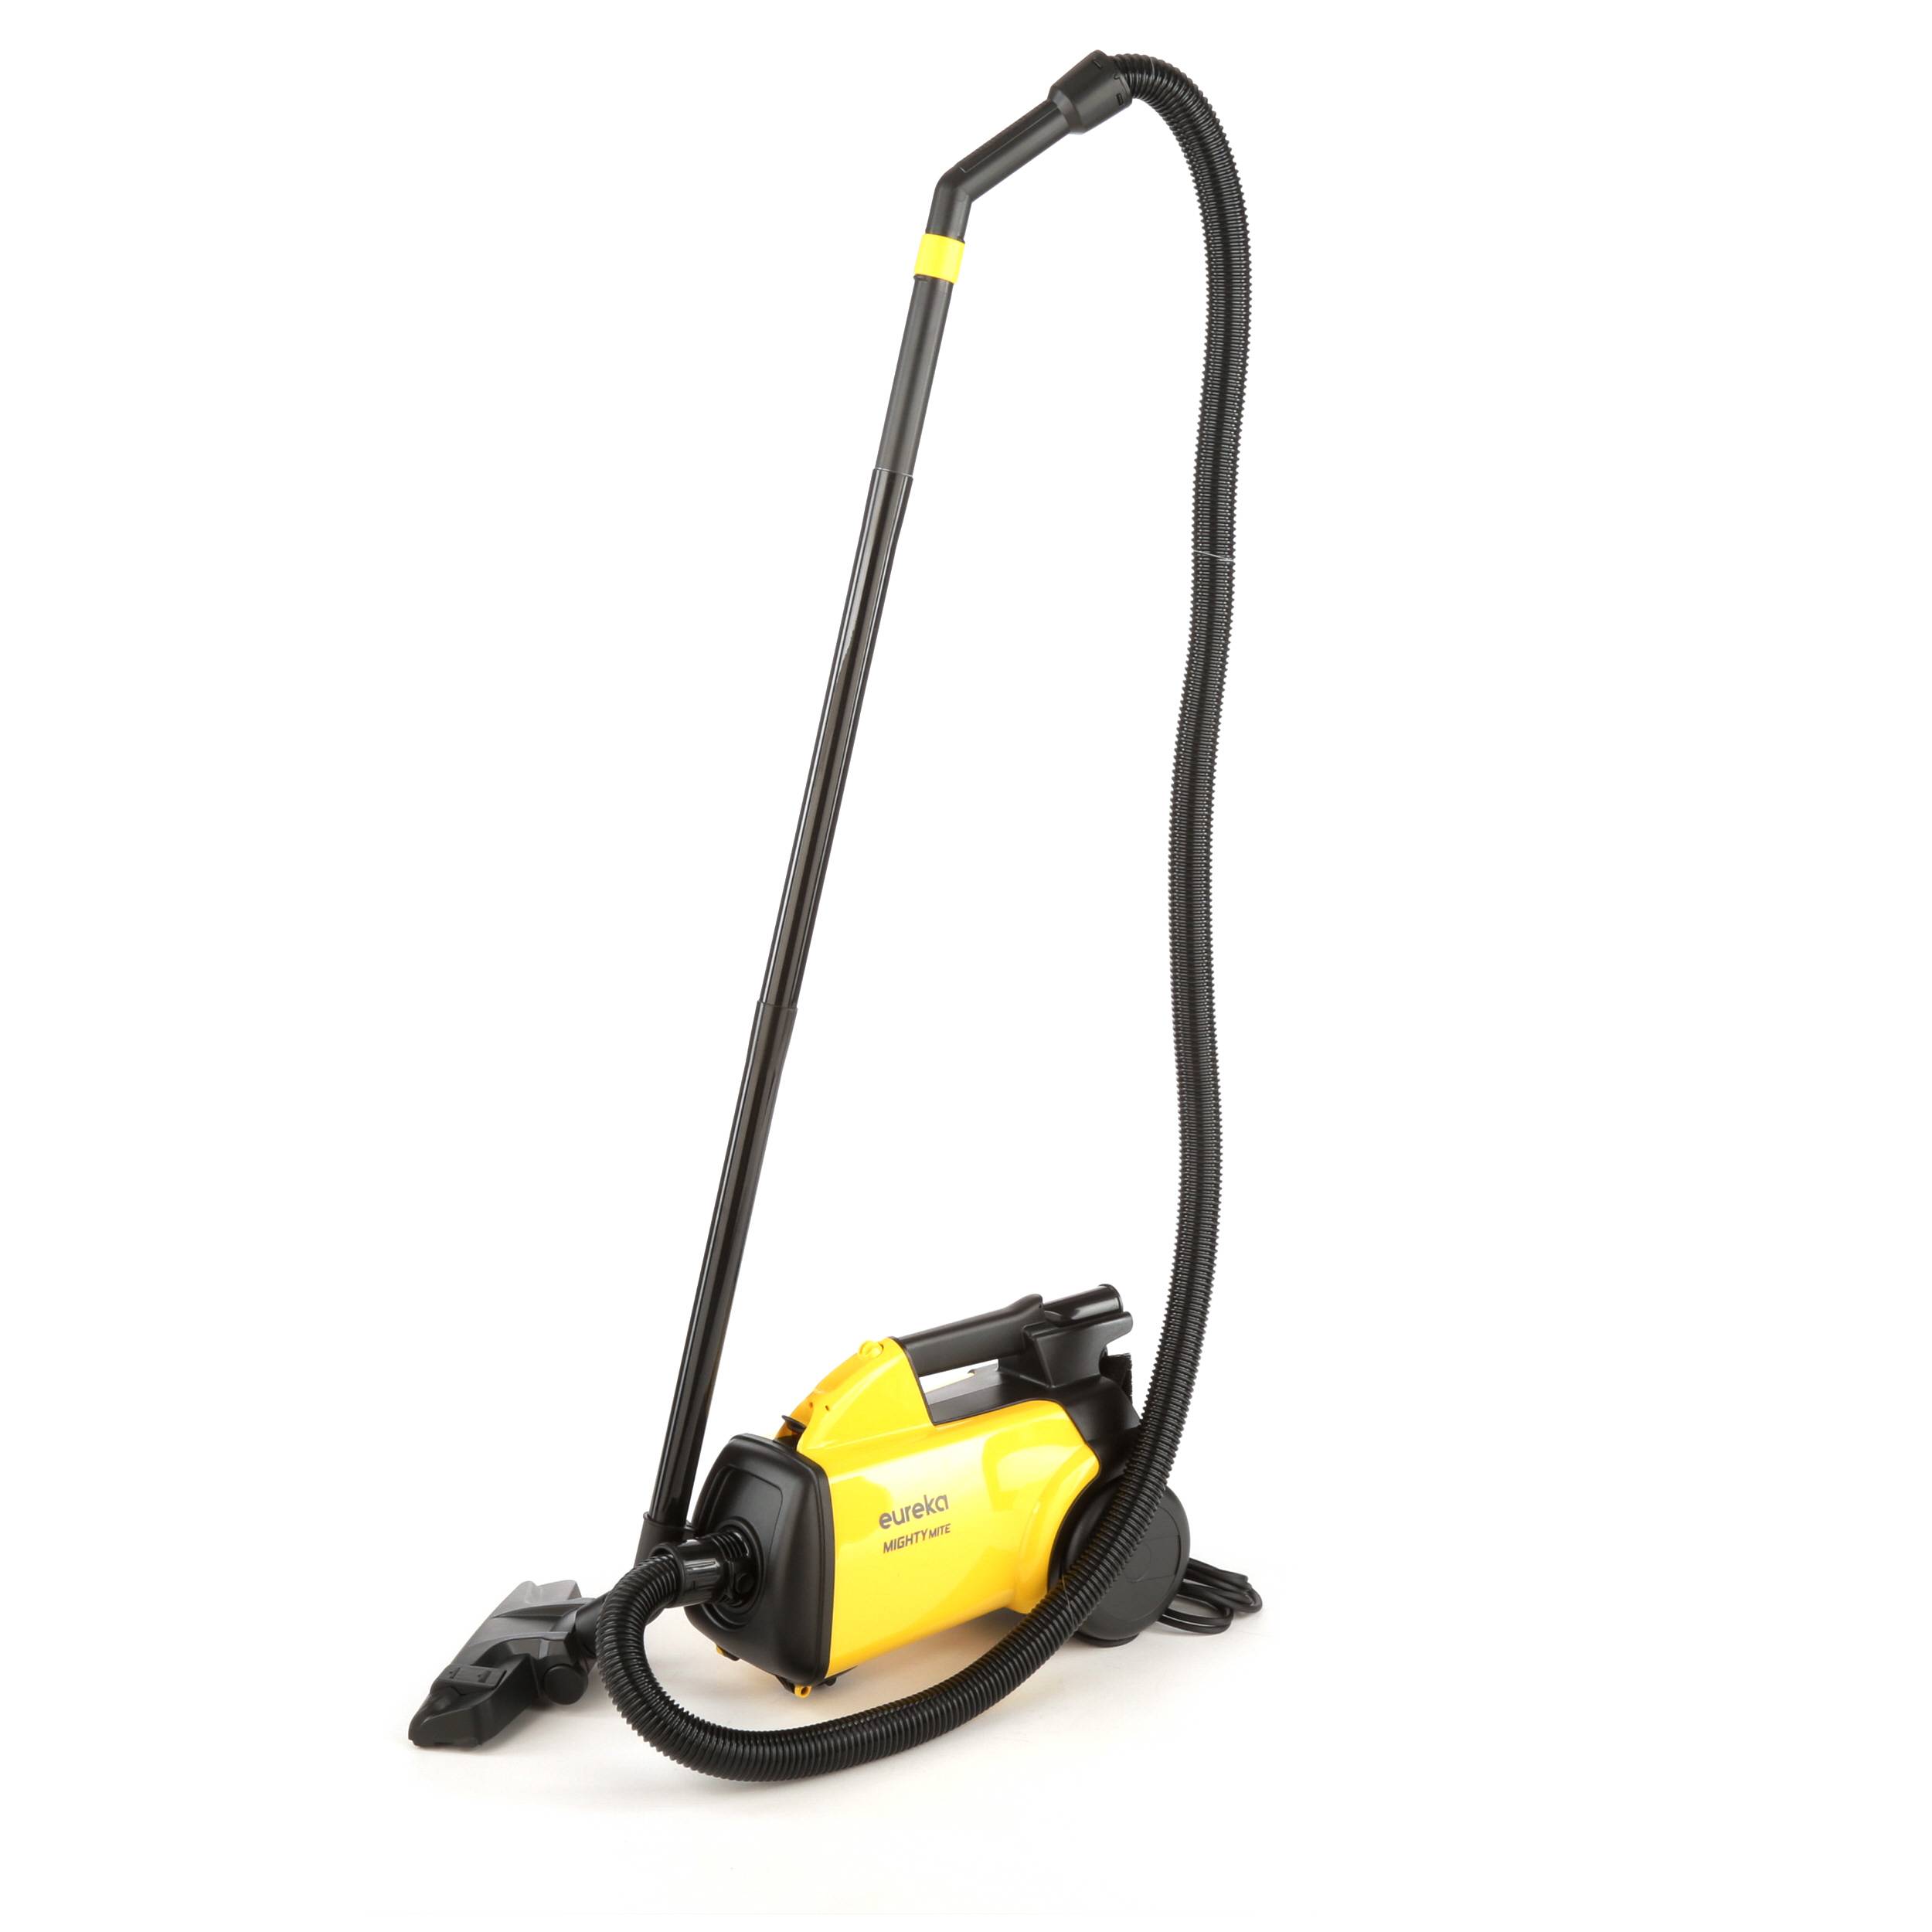 Eureka 12amp Mighty Mite Canister Vacuum Yellow Euk3670 for sale online